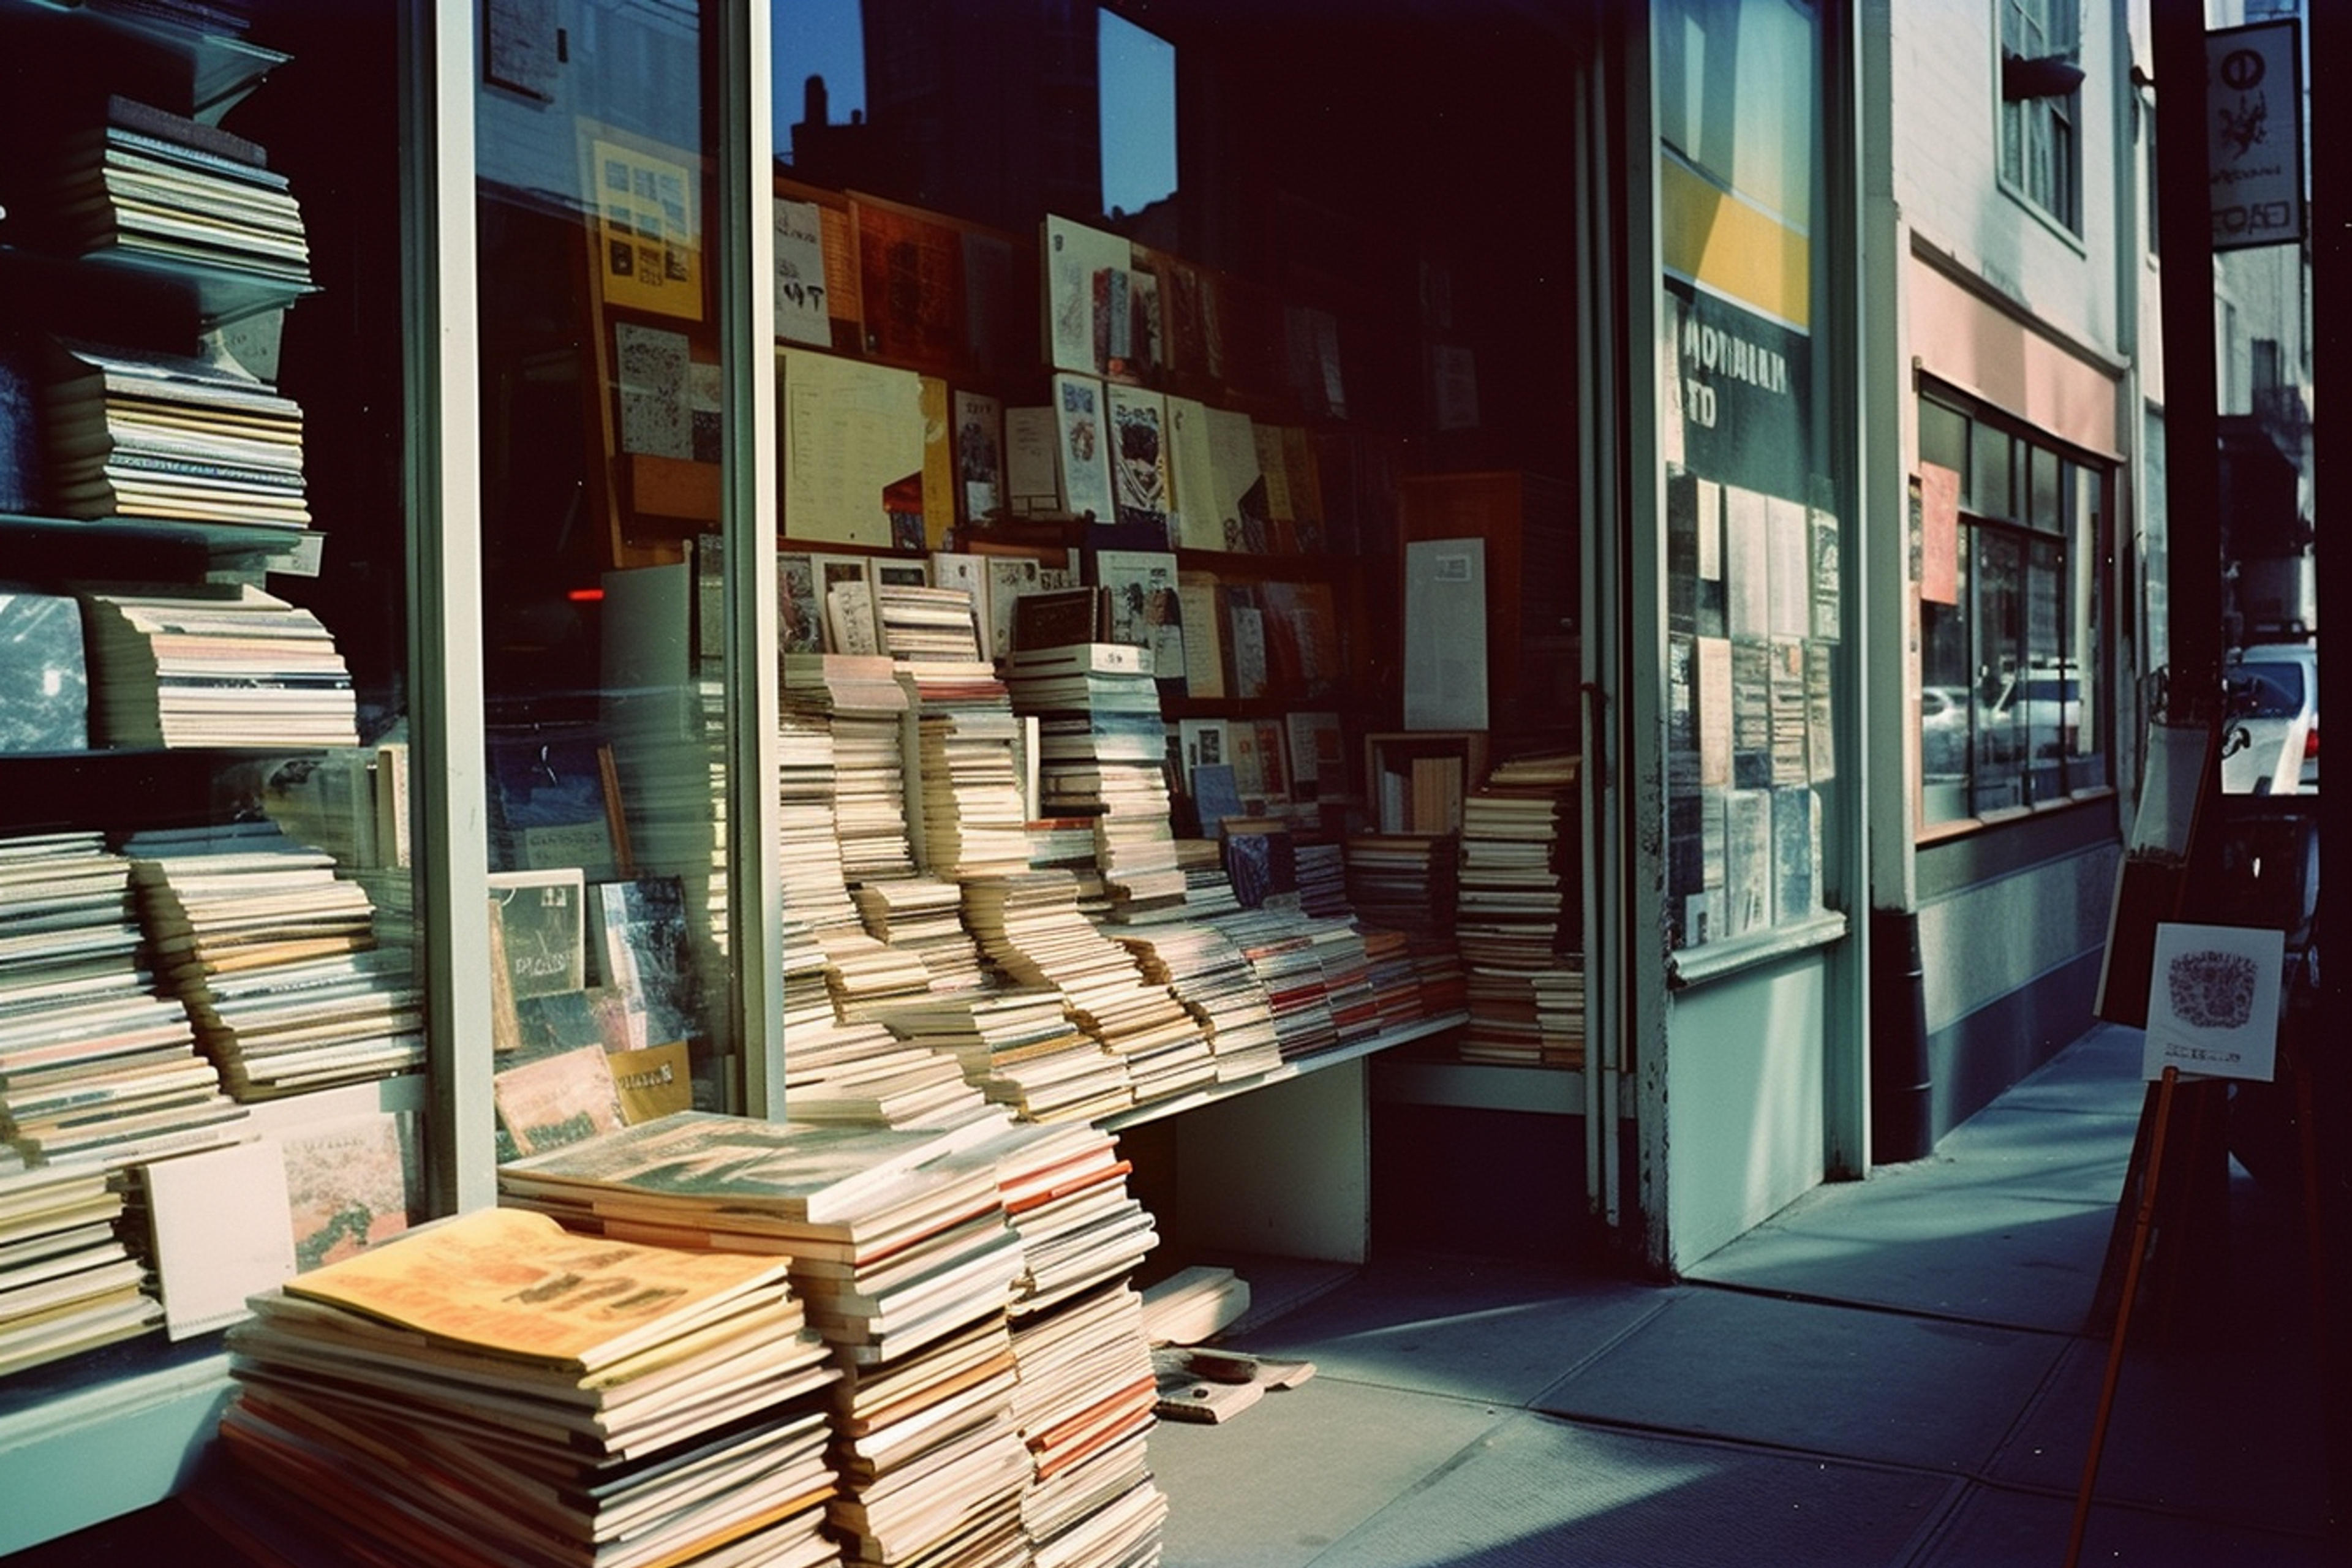 Freeflo - Bookstore in the Style of Instant Film